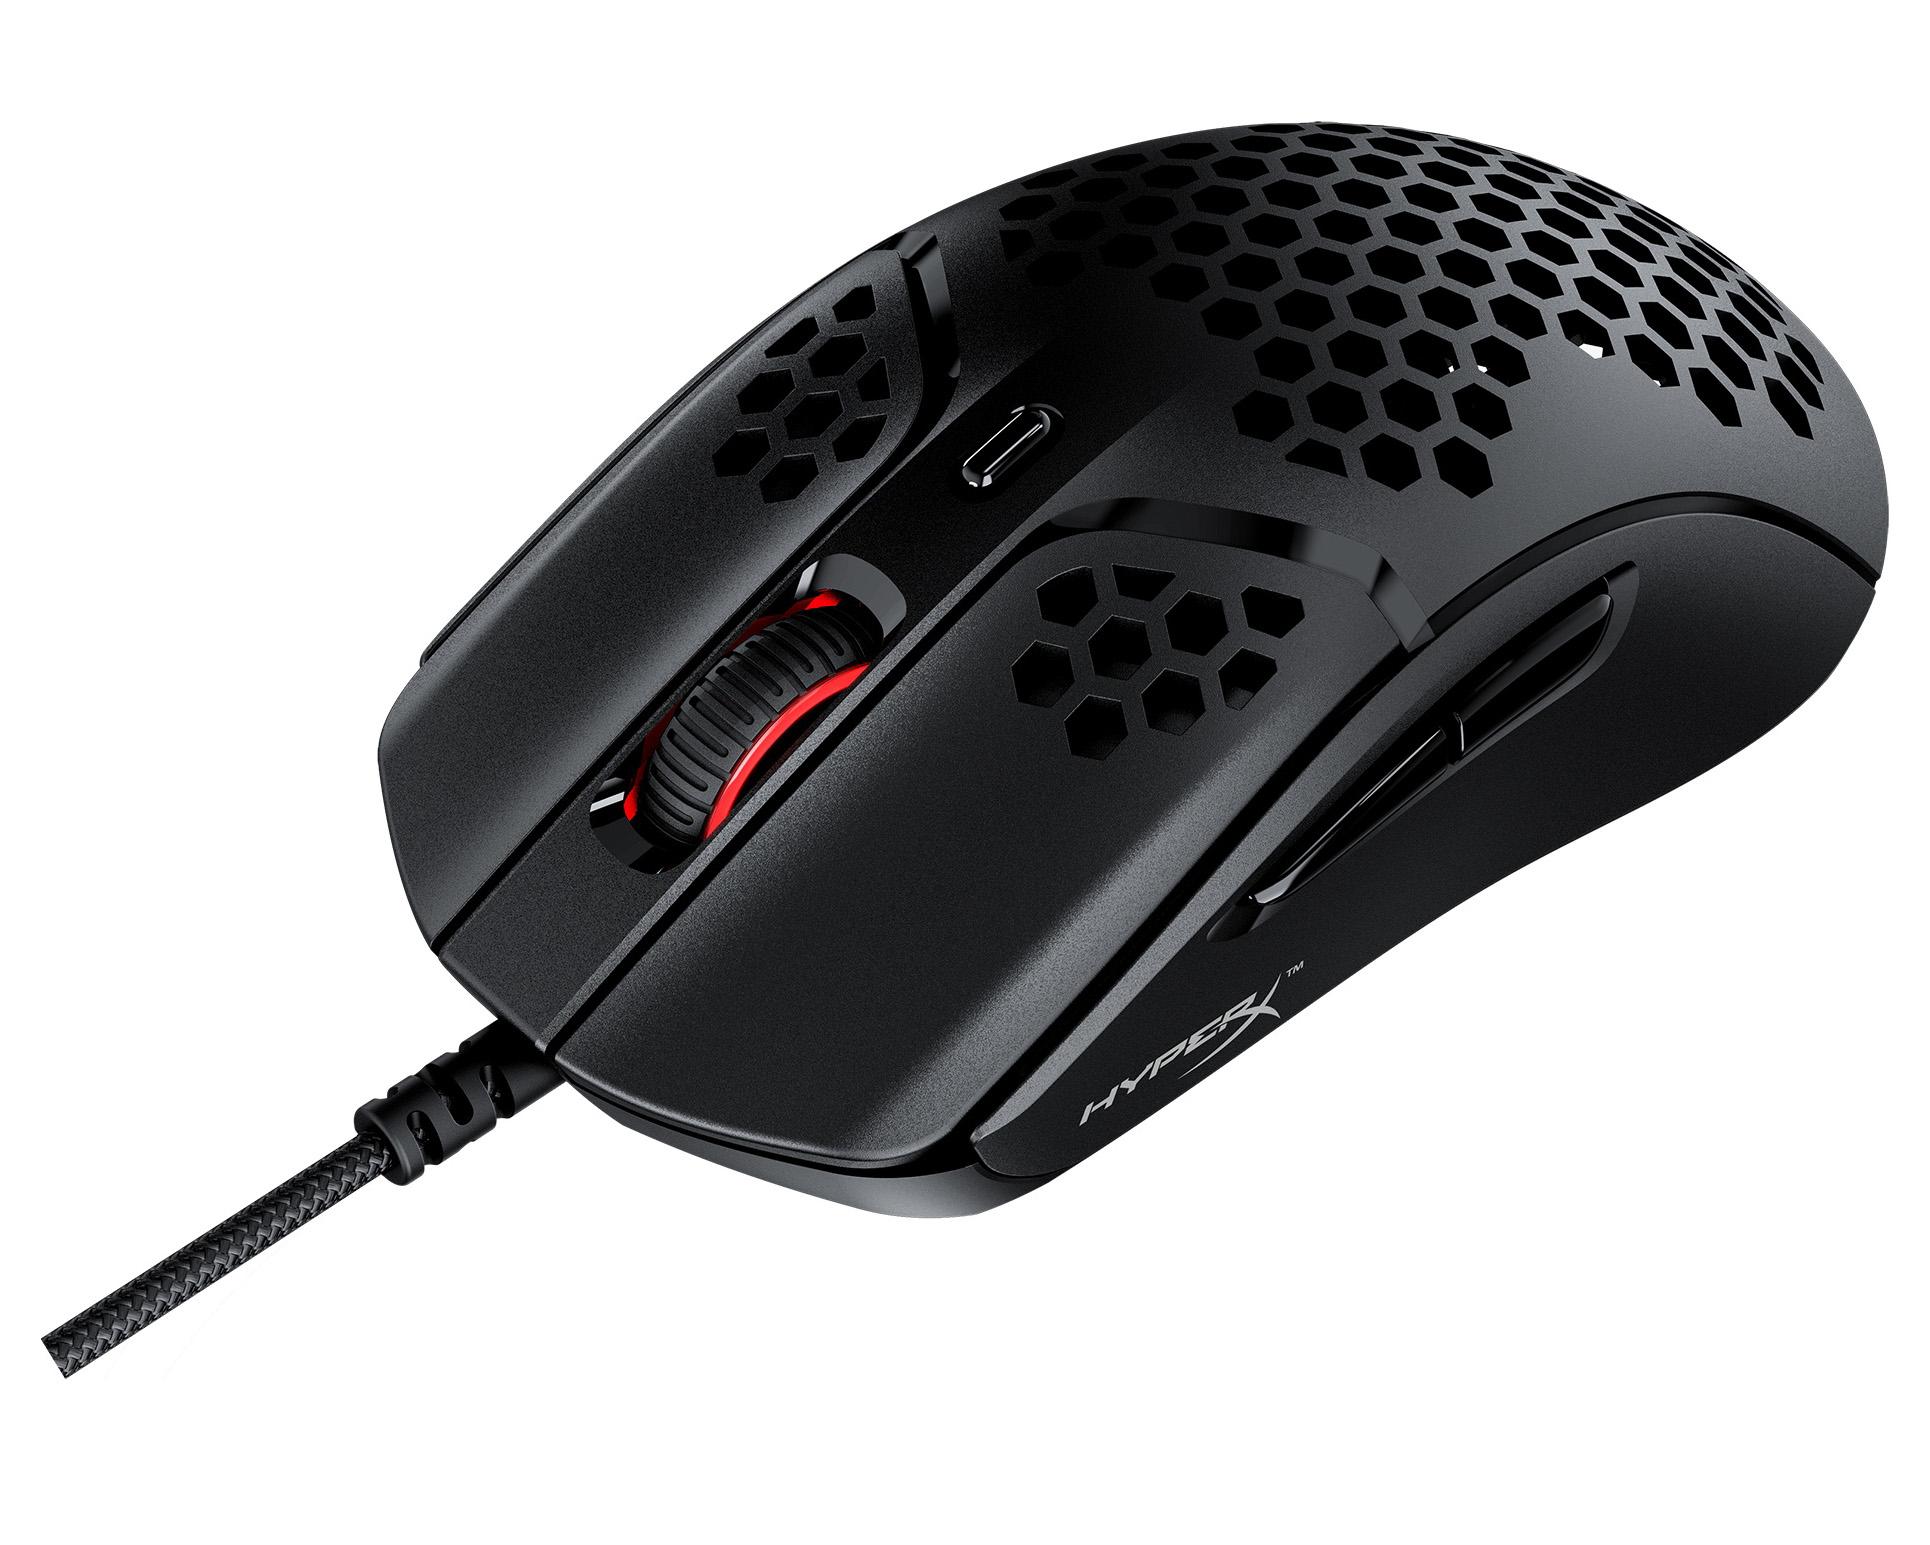 HyperX Pulsefire Haste Wireless Gaming Mouse for $48 Shipped